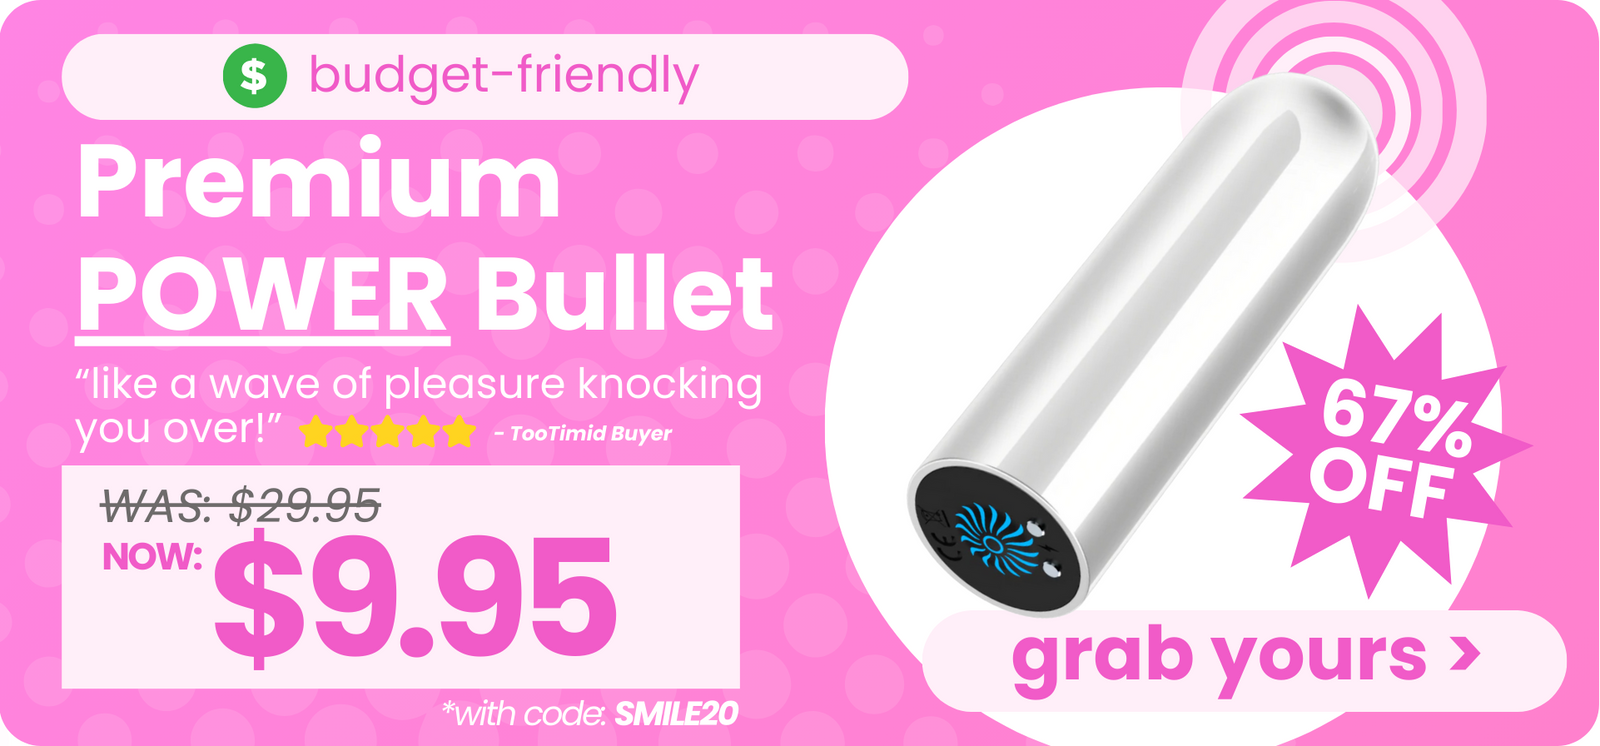 Budget-friendly flash deal! 67% OFF. Premium power bullet. "Like a wave of pleasure knocking you over" Was $29.95, now $9.95 with code: SMILE20